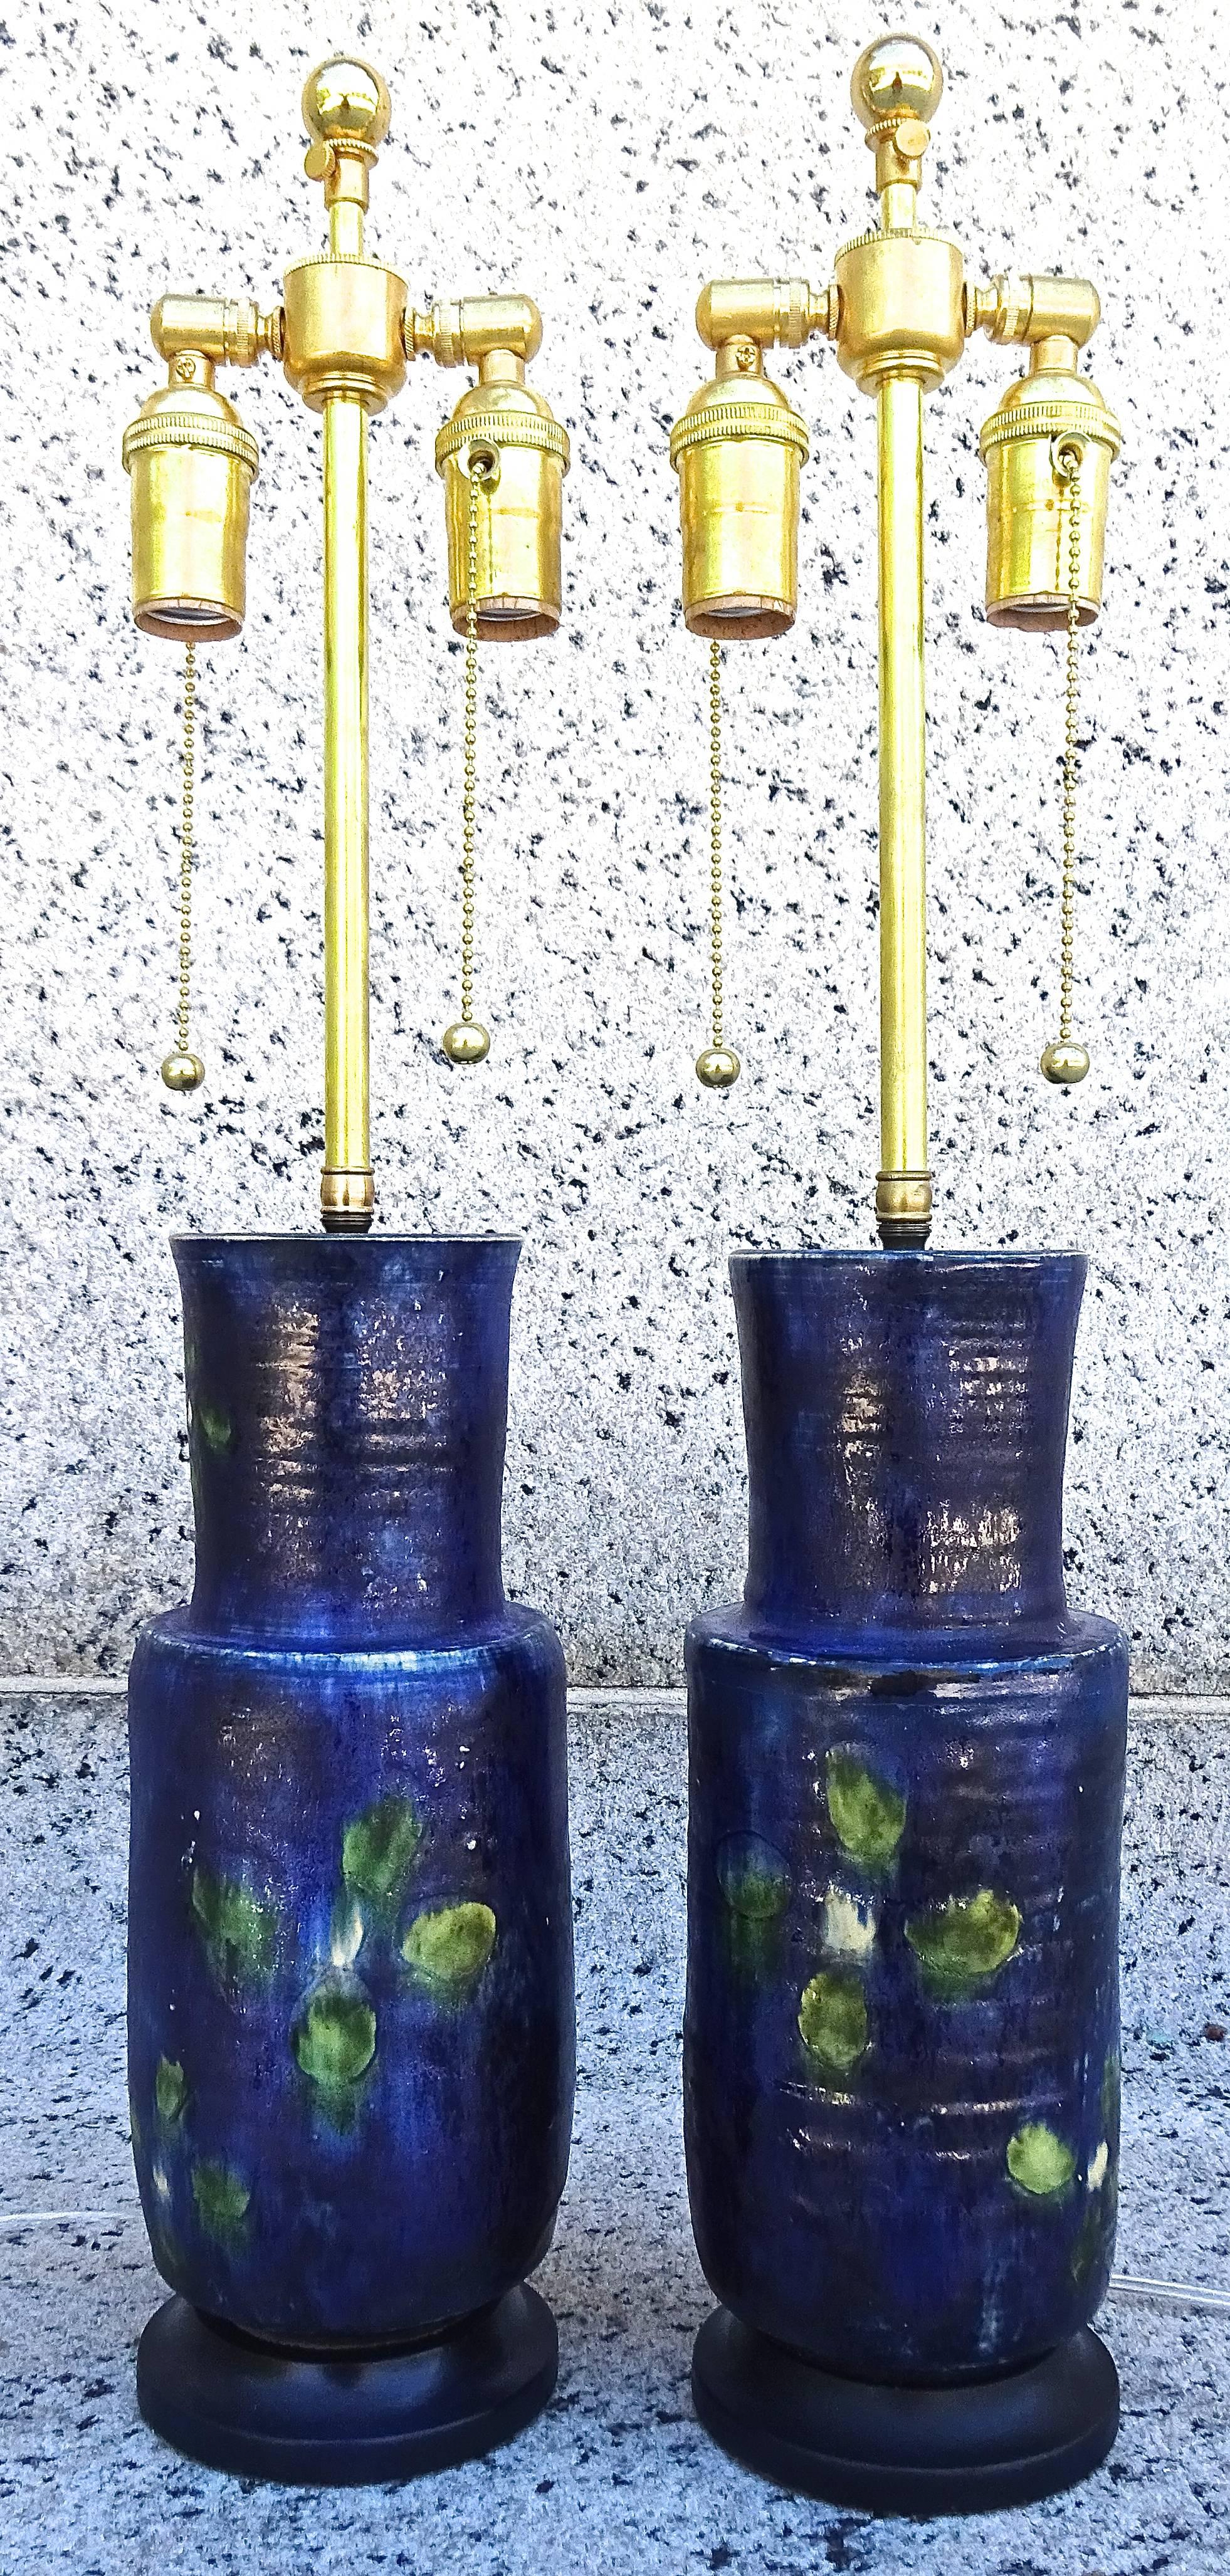 Charming pair of vibrant blue art pottery table lamps, 1950s French. Pottery vases are hand thrown and decorated, and fitted with new brass double socket hardware.